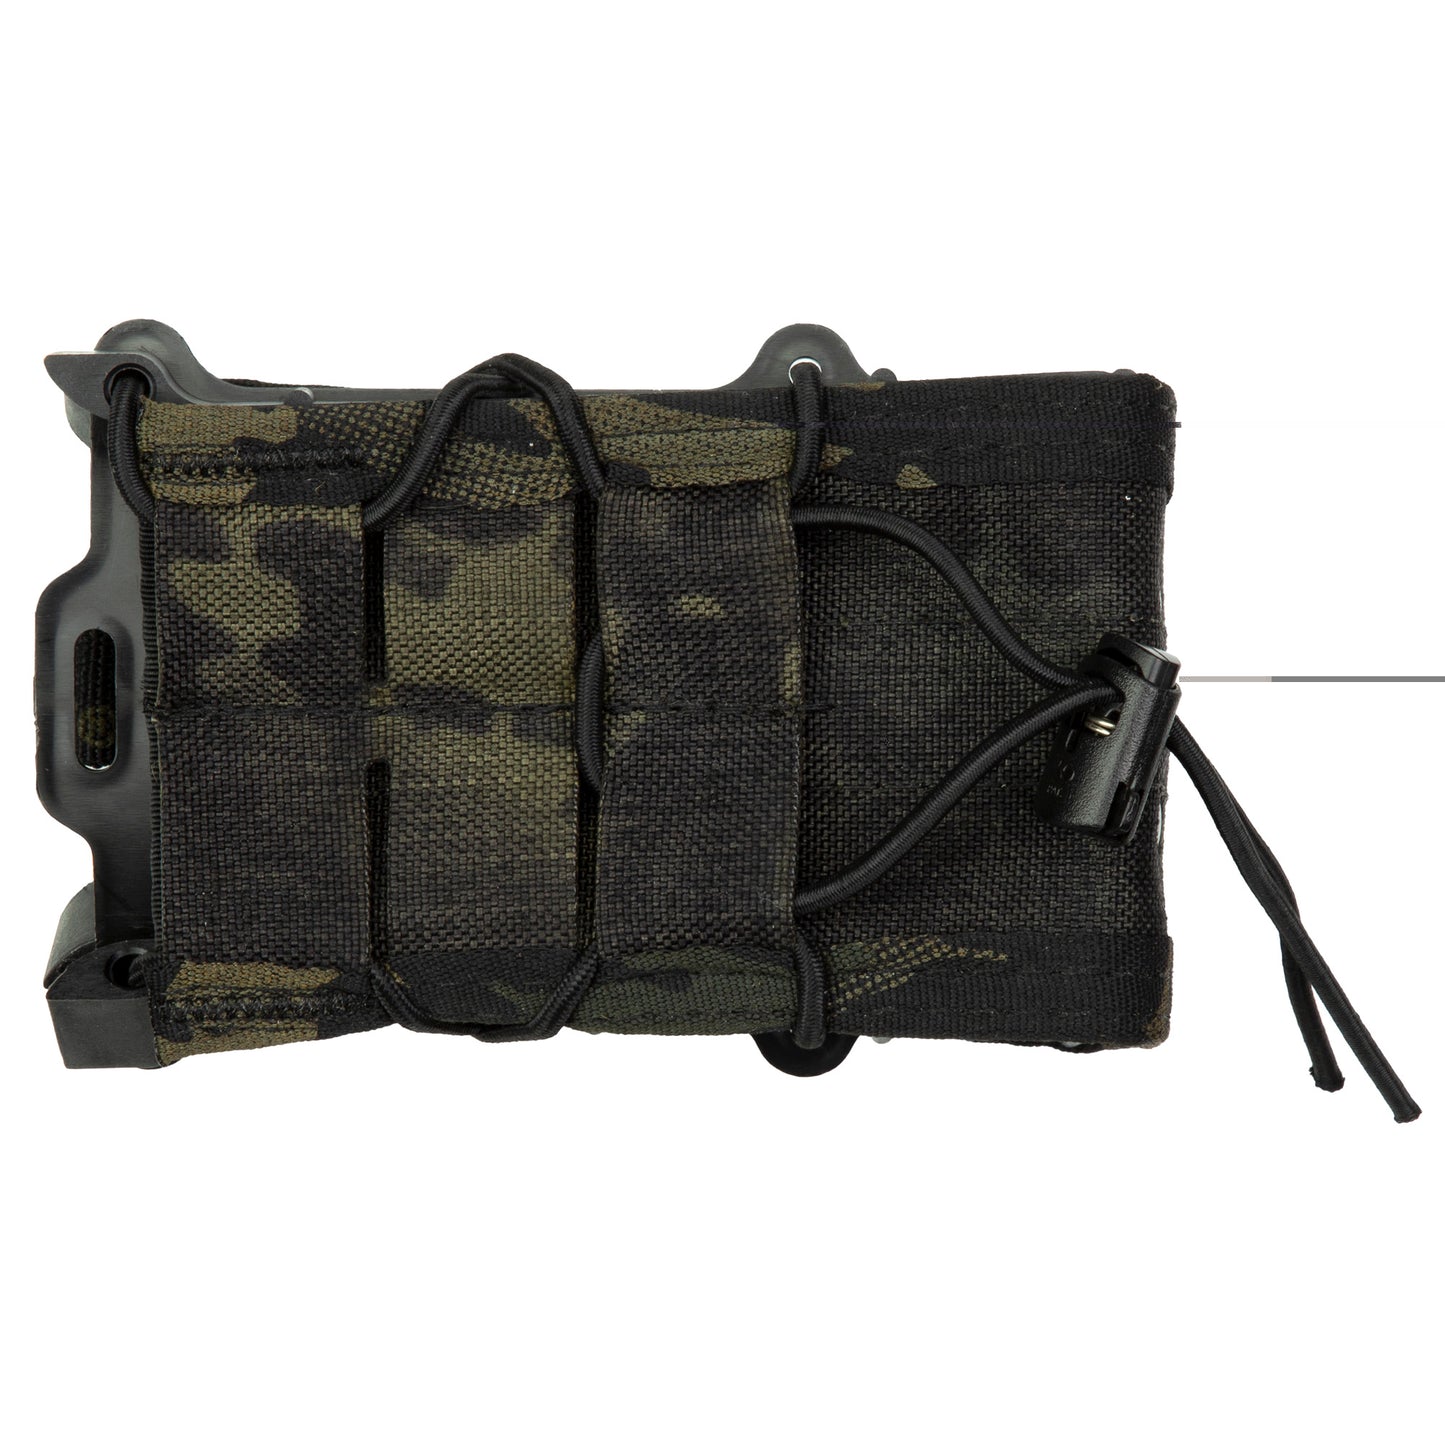 High Speed Gear, X2R TACO, Dual Magazine Pouch, Molle, Fits Most Rifle Magazines, Hybrid Kydex and Nylon, Multicam Black